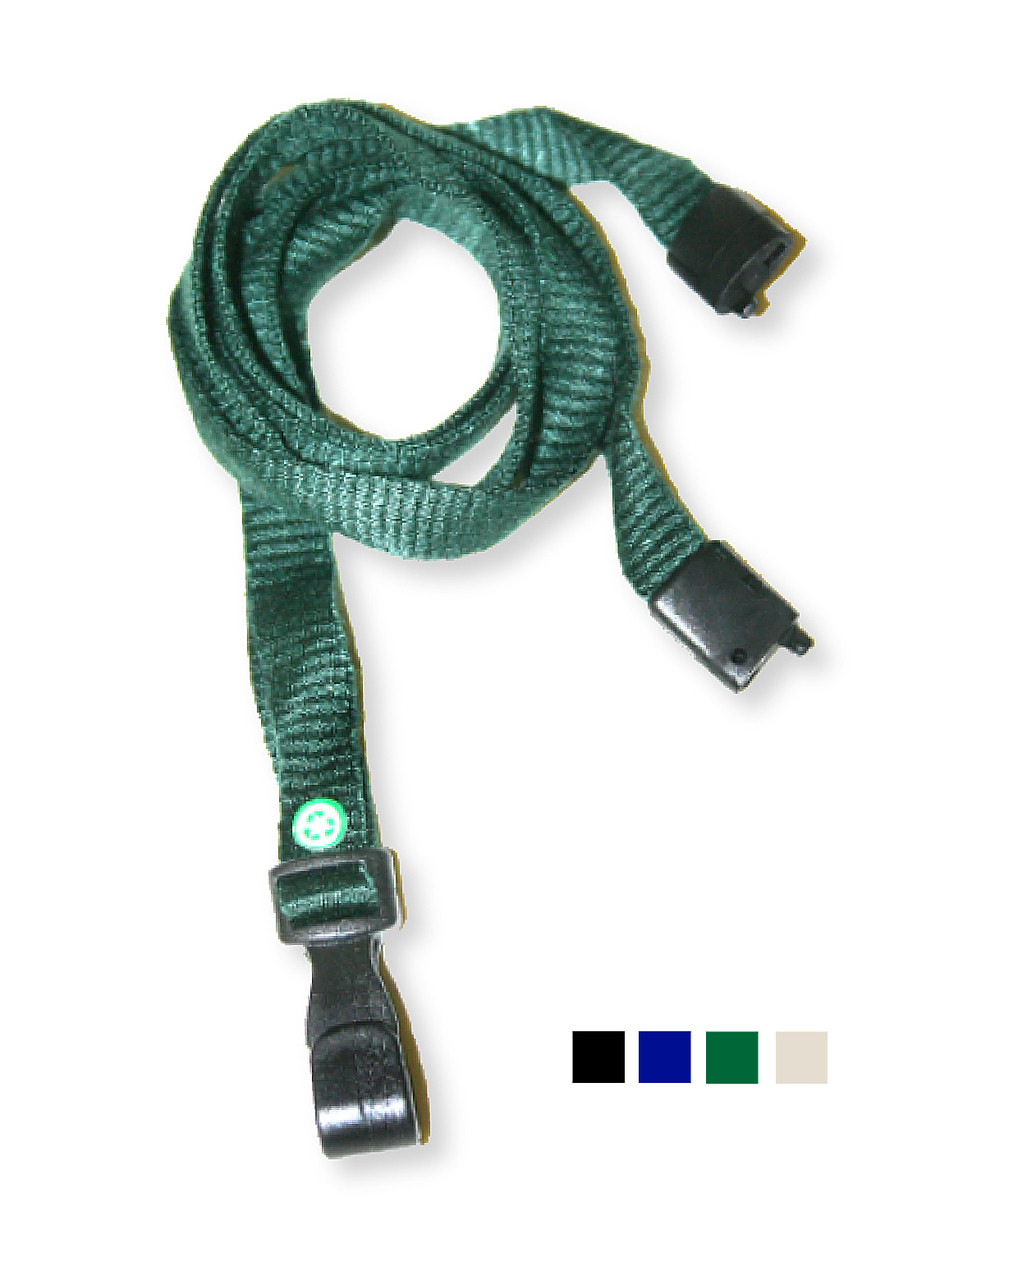 Bamboo Lanyards with Plastic Hook and Safety Breakaway